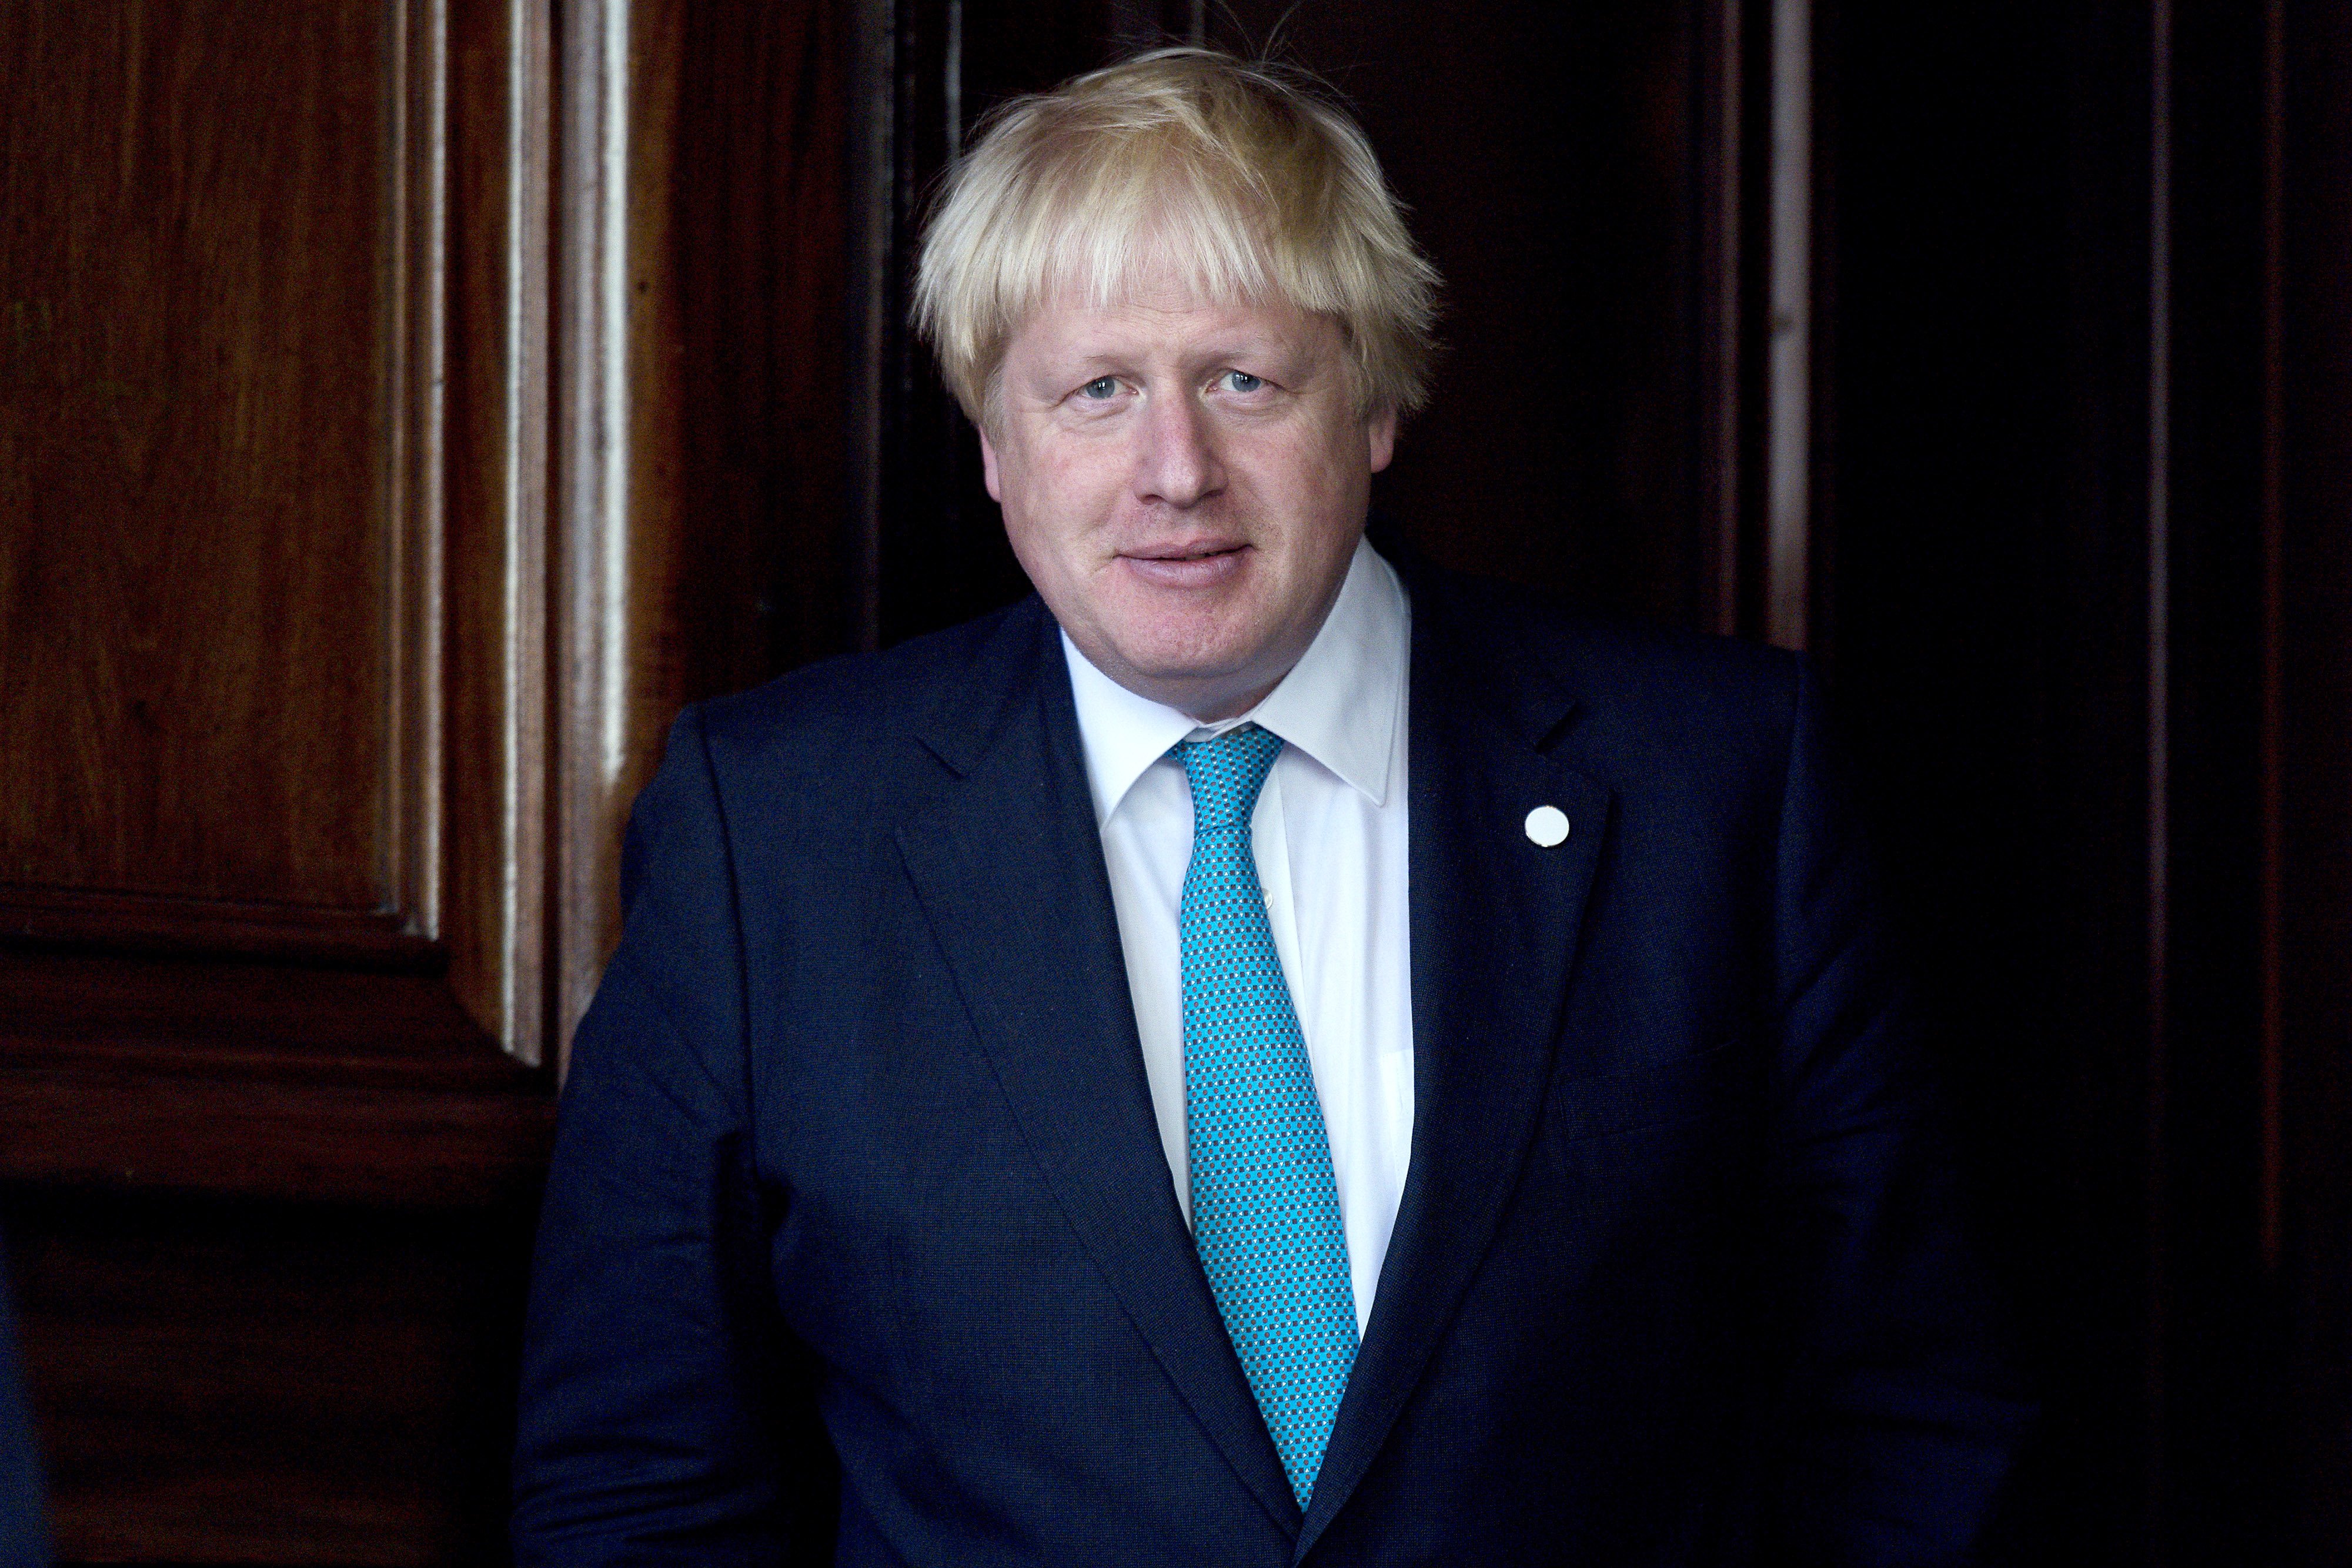 Boris Johnson at Lancaster House on October 16, 2016, in London, England | Photo: Getty Images